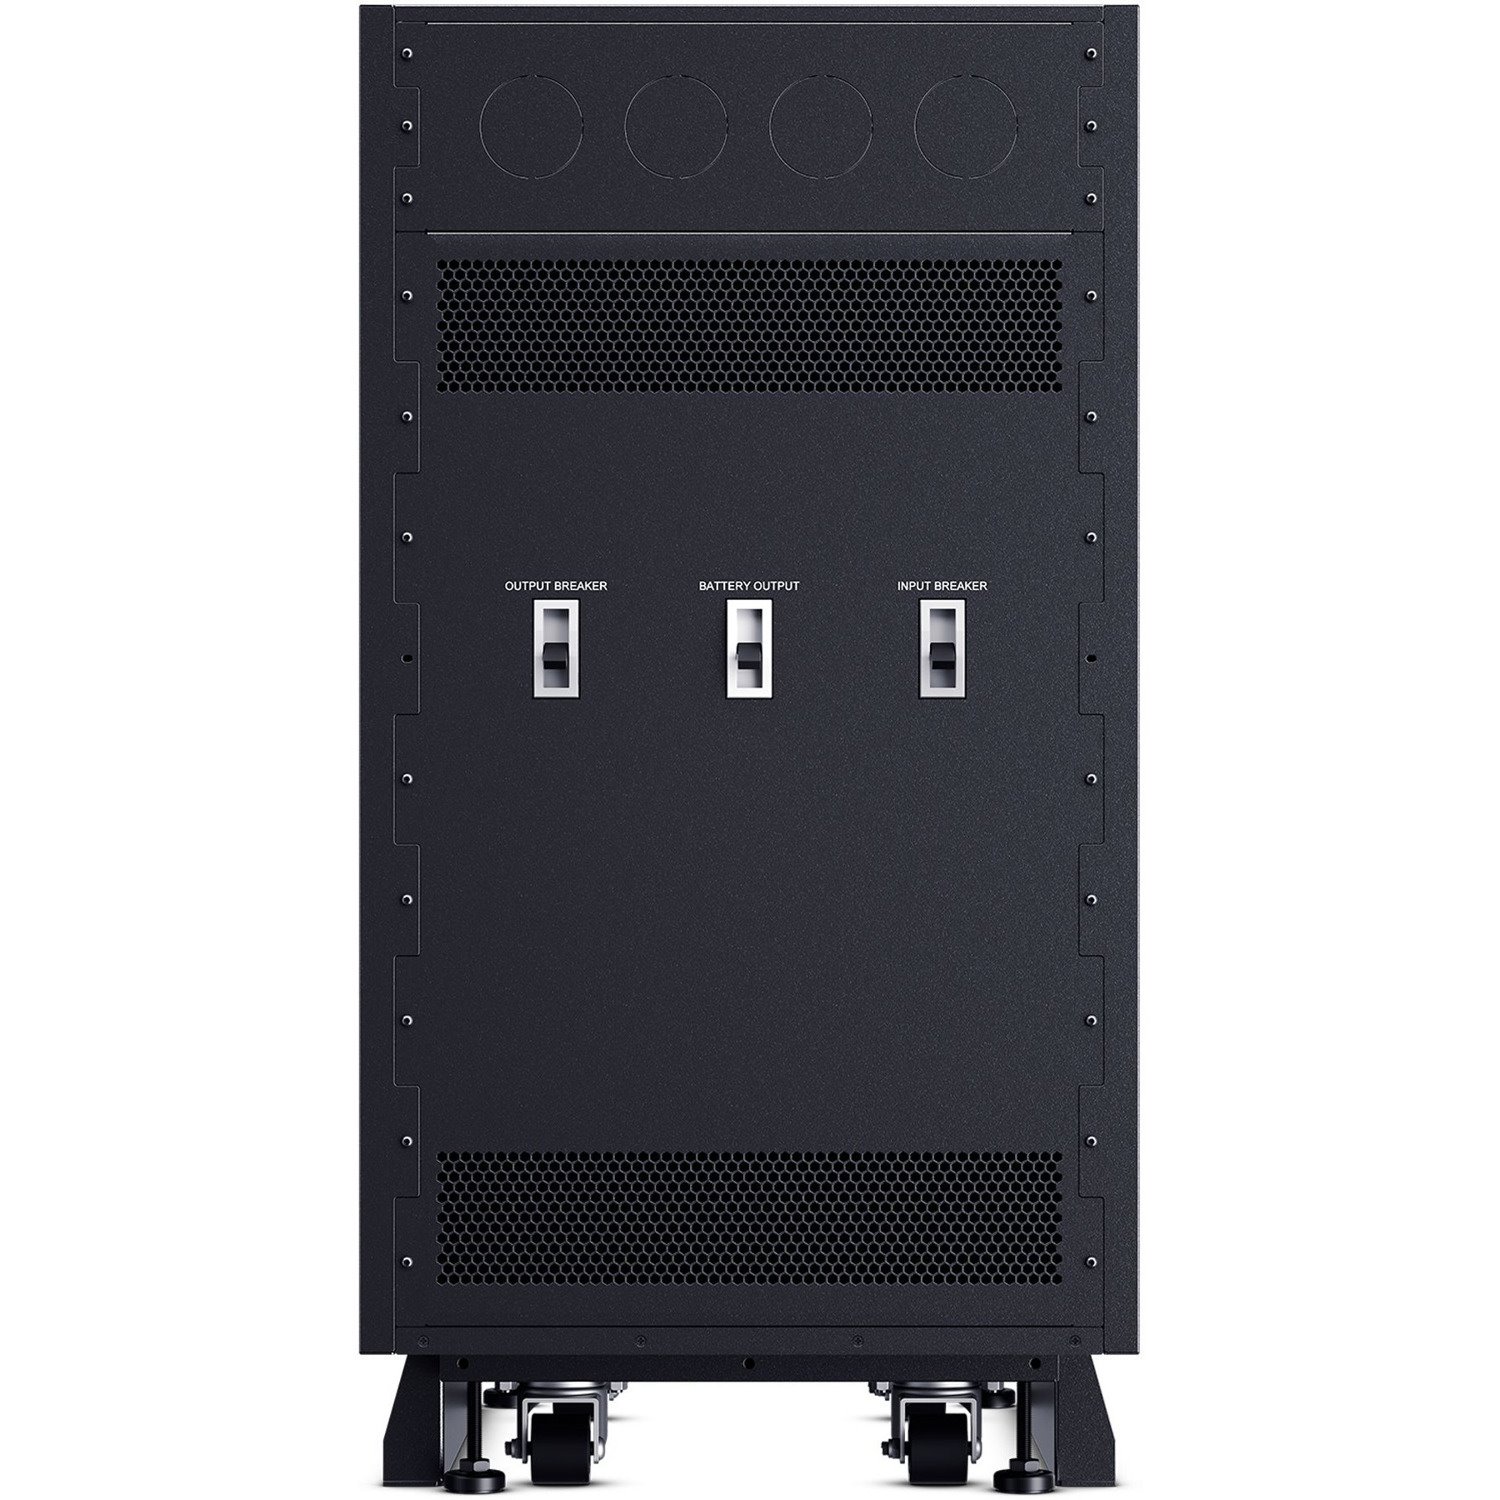 CyberPower BCT6L9N225 3-Phase Modular UPS Battery Cabinets